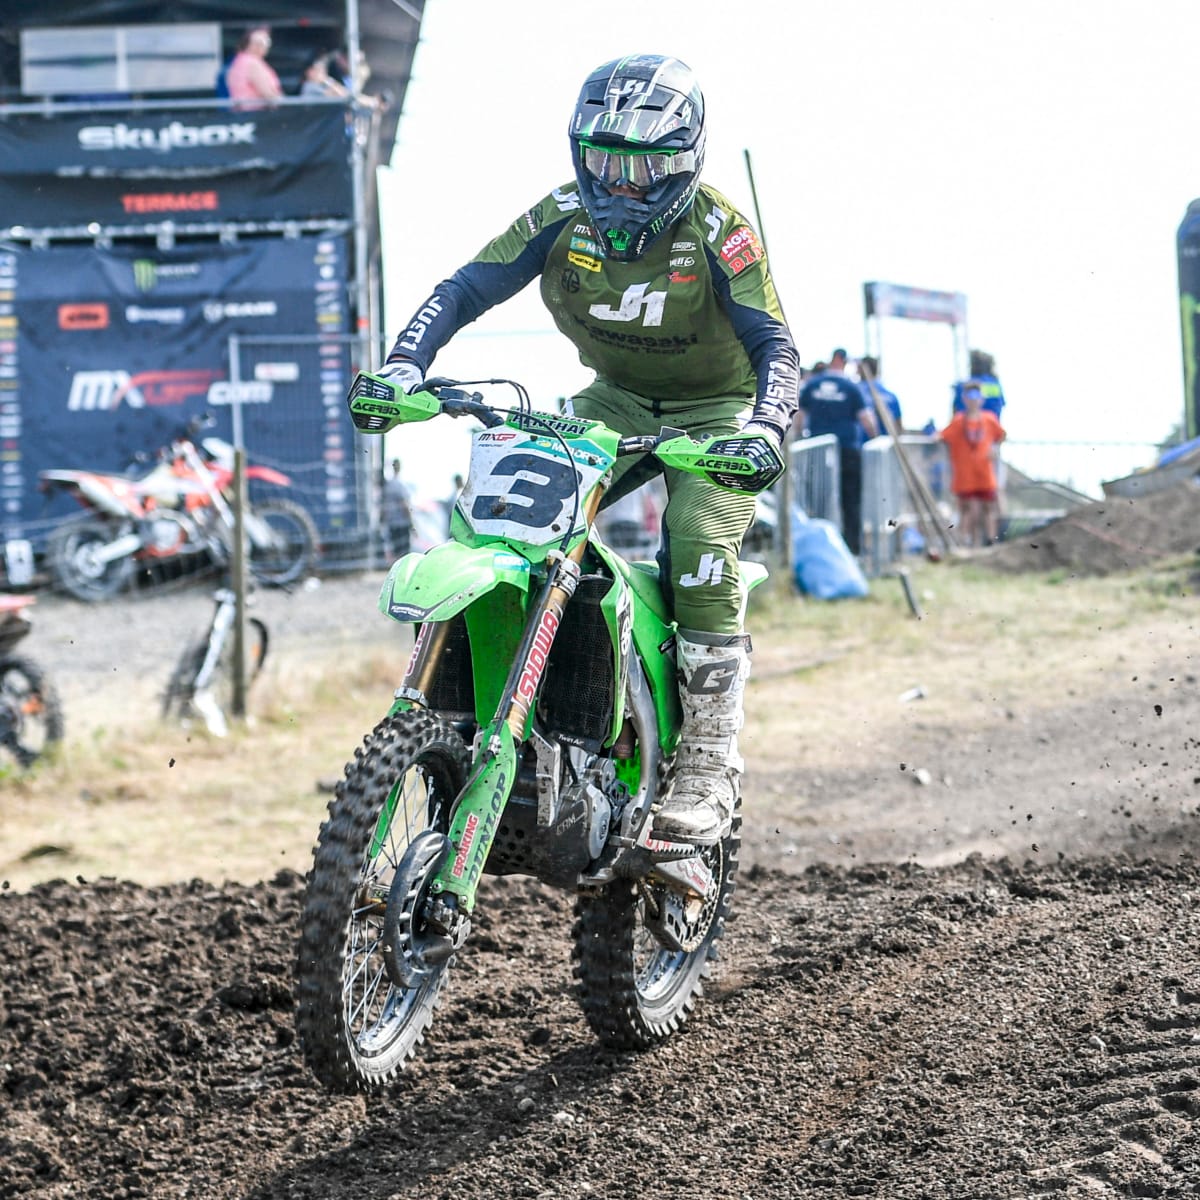 How to Watch SuperMotocross World Championship Playoffs Stream Motocross Live, TV Channel